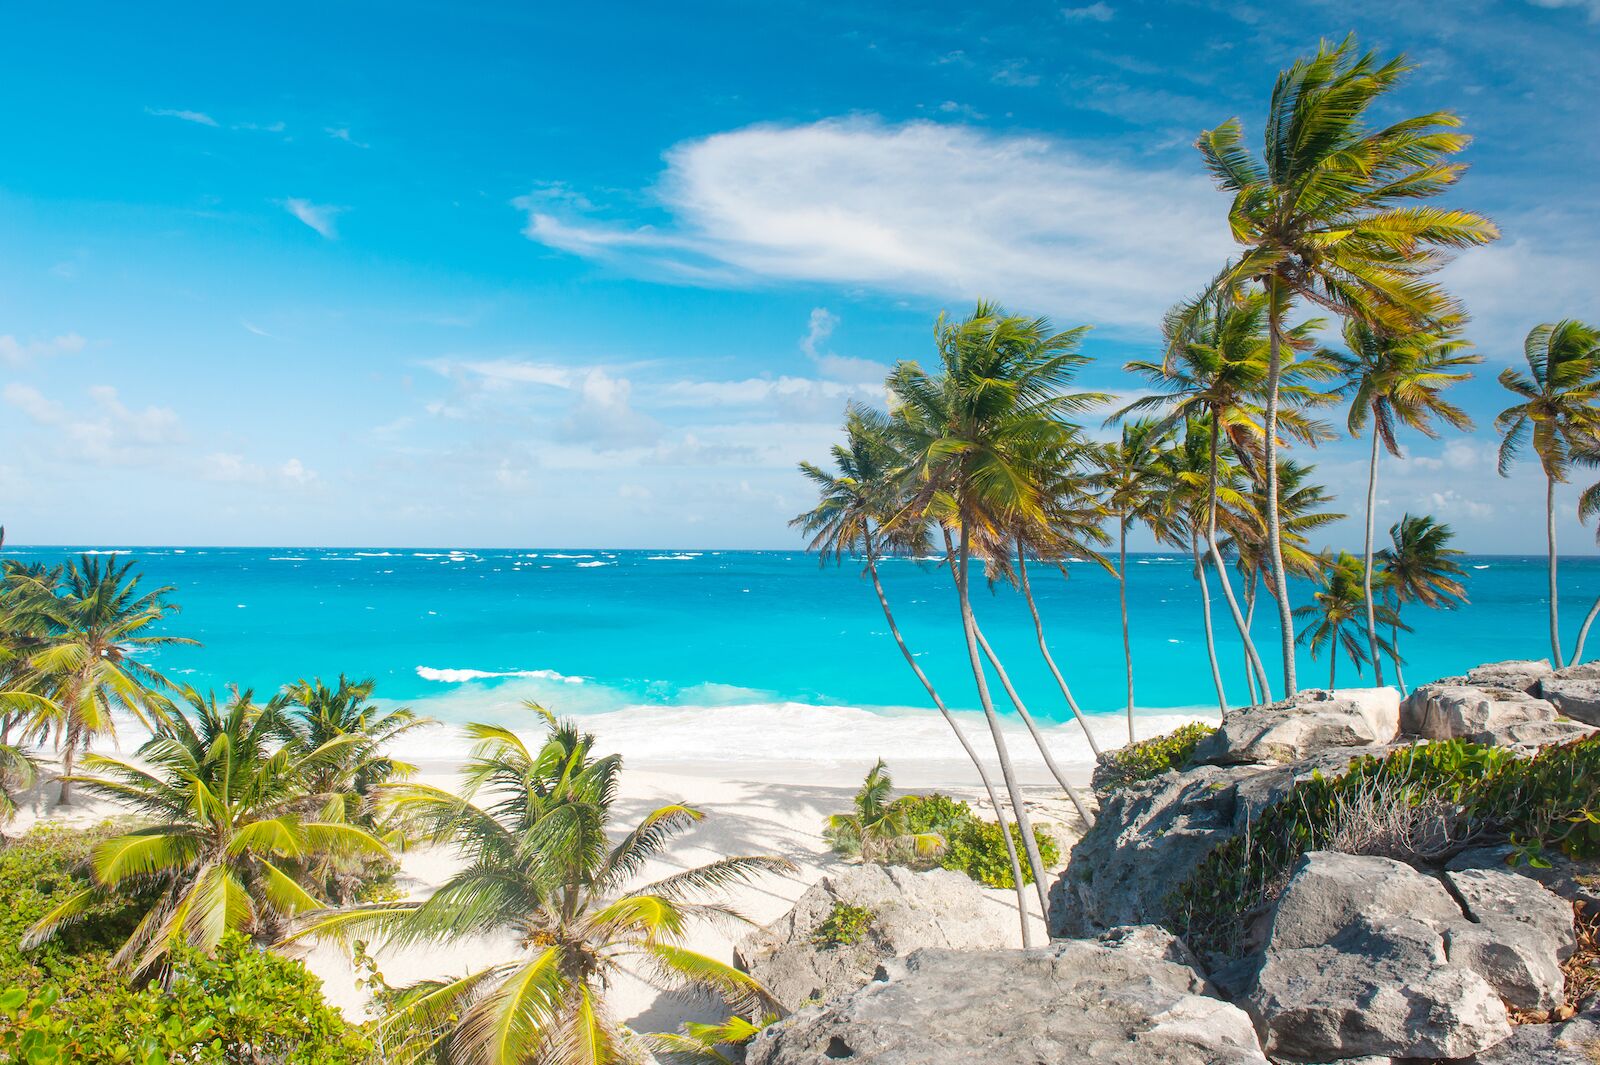 View of Bottom Bay, one of the most beautiful beaches on the Caribbean island of Barbados. It is a tropical paradise with palms hanging over turquoise sea.